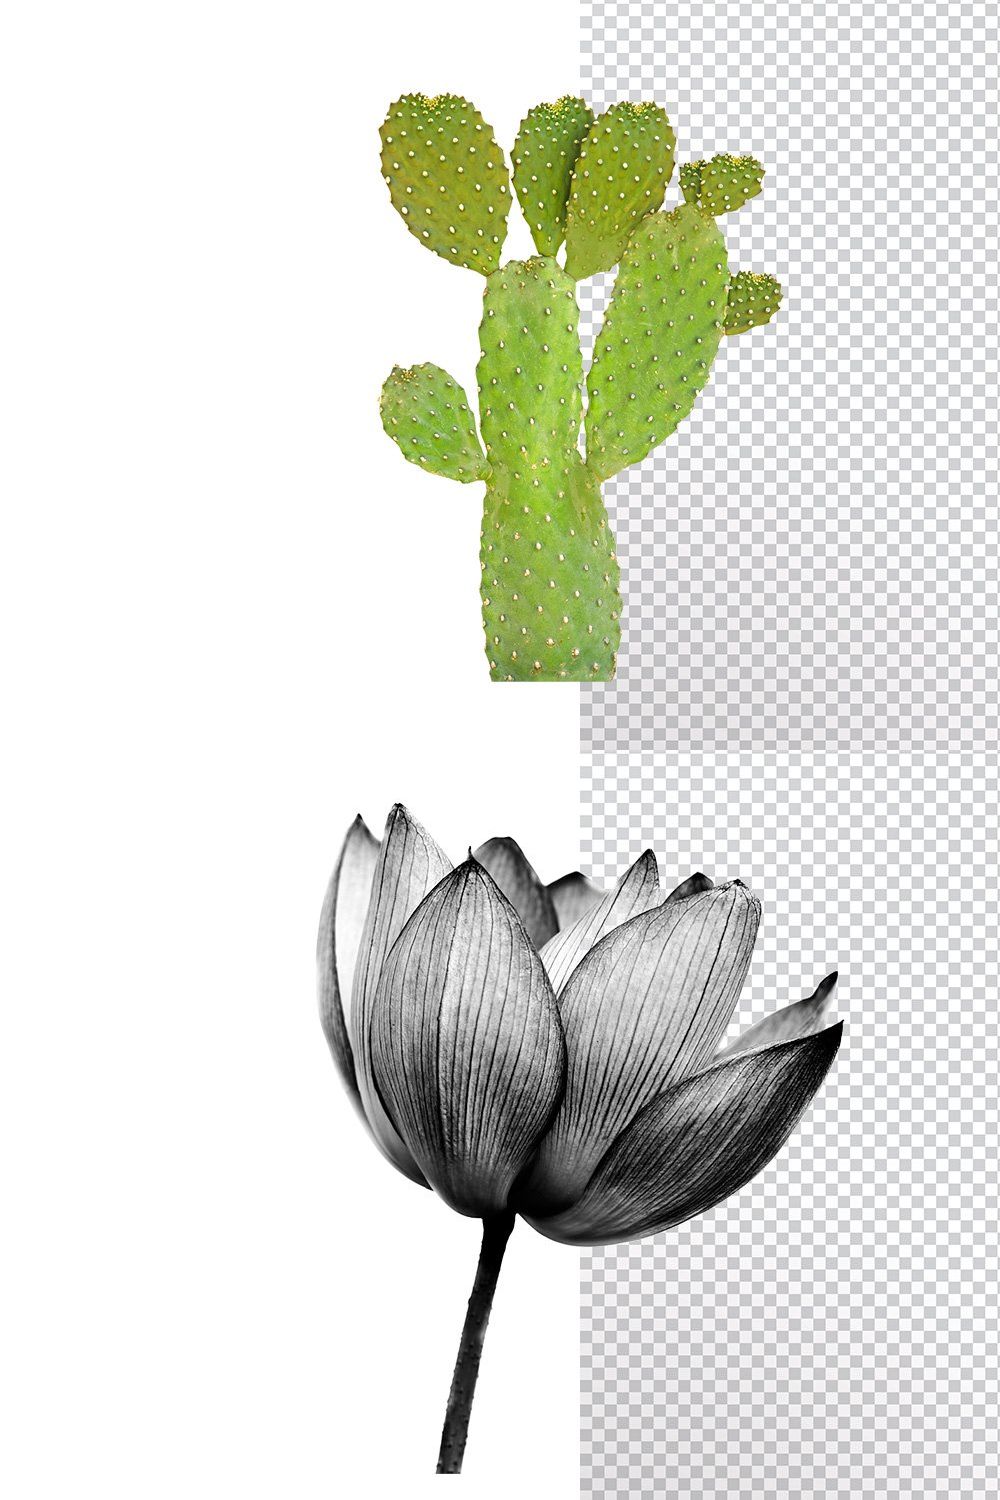 White Background Remover pinterest preview image.